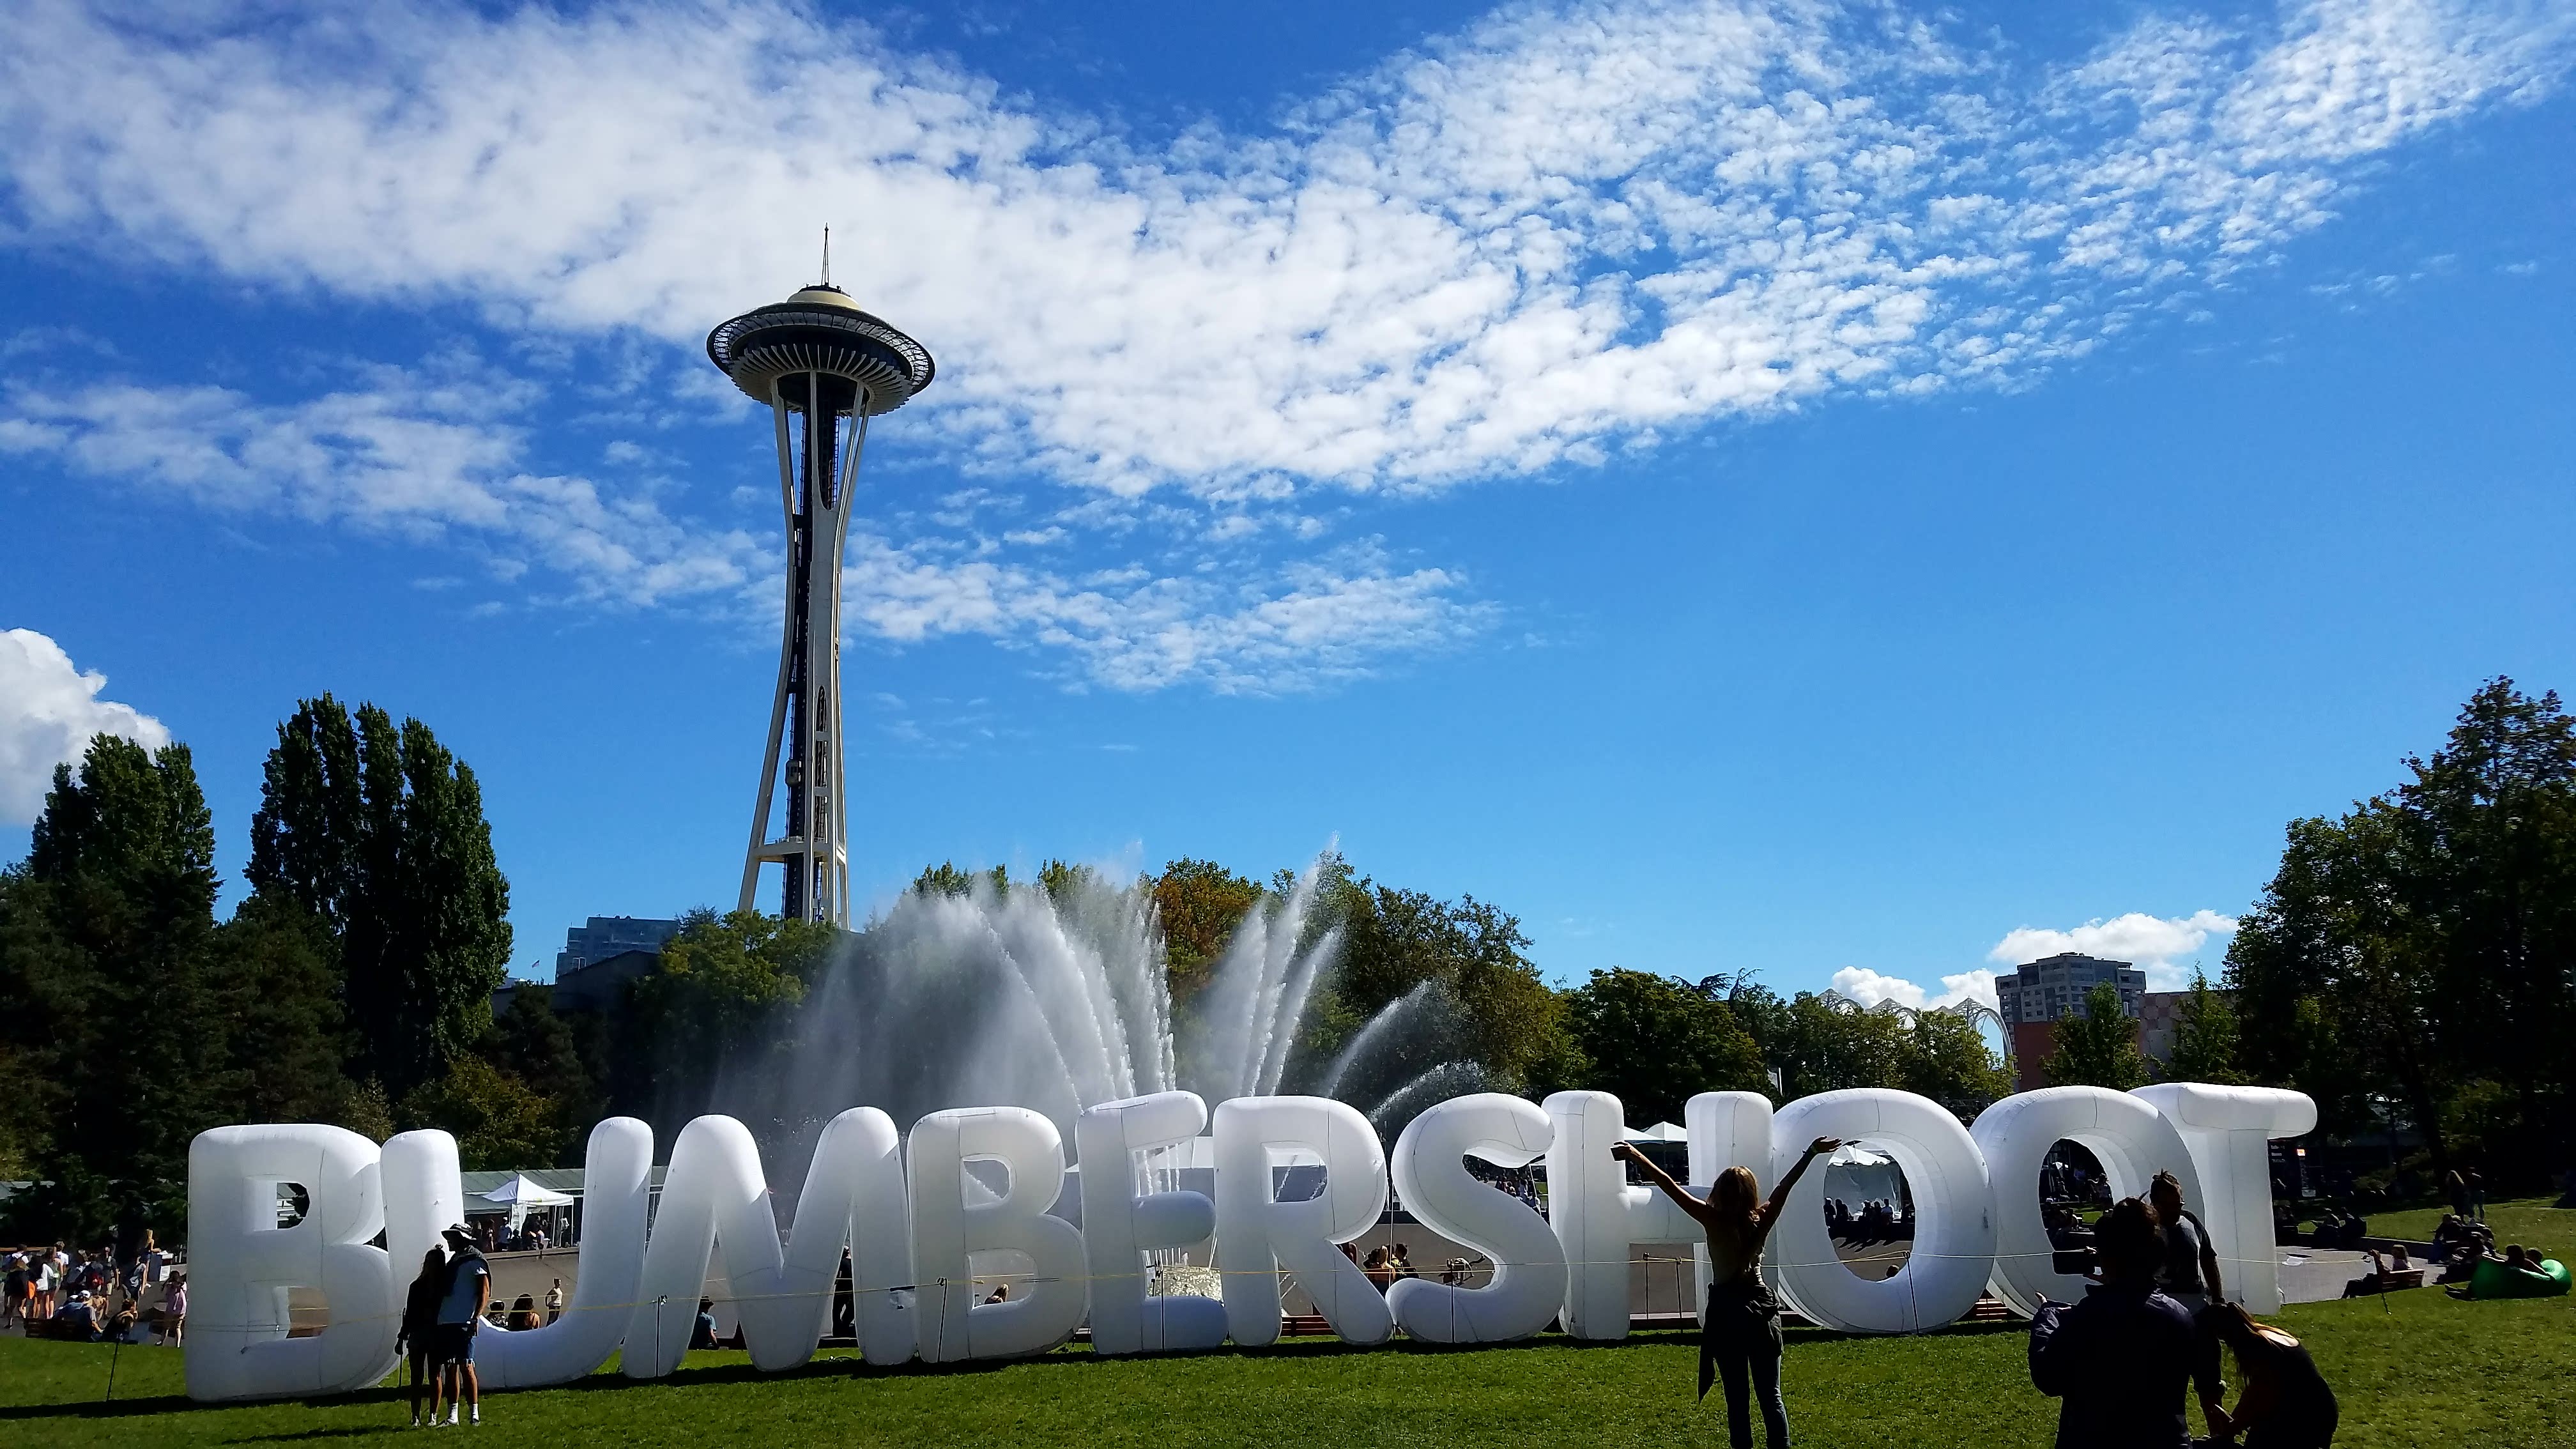 bumbershoot festival grounds with space needle in background